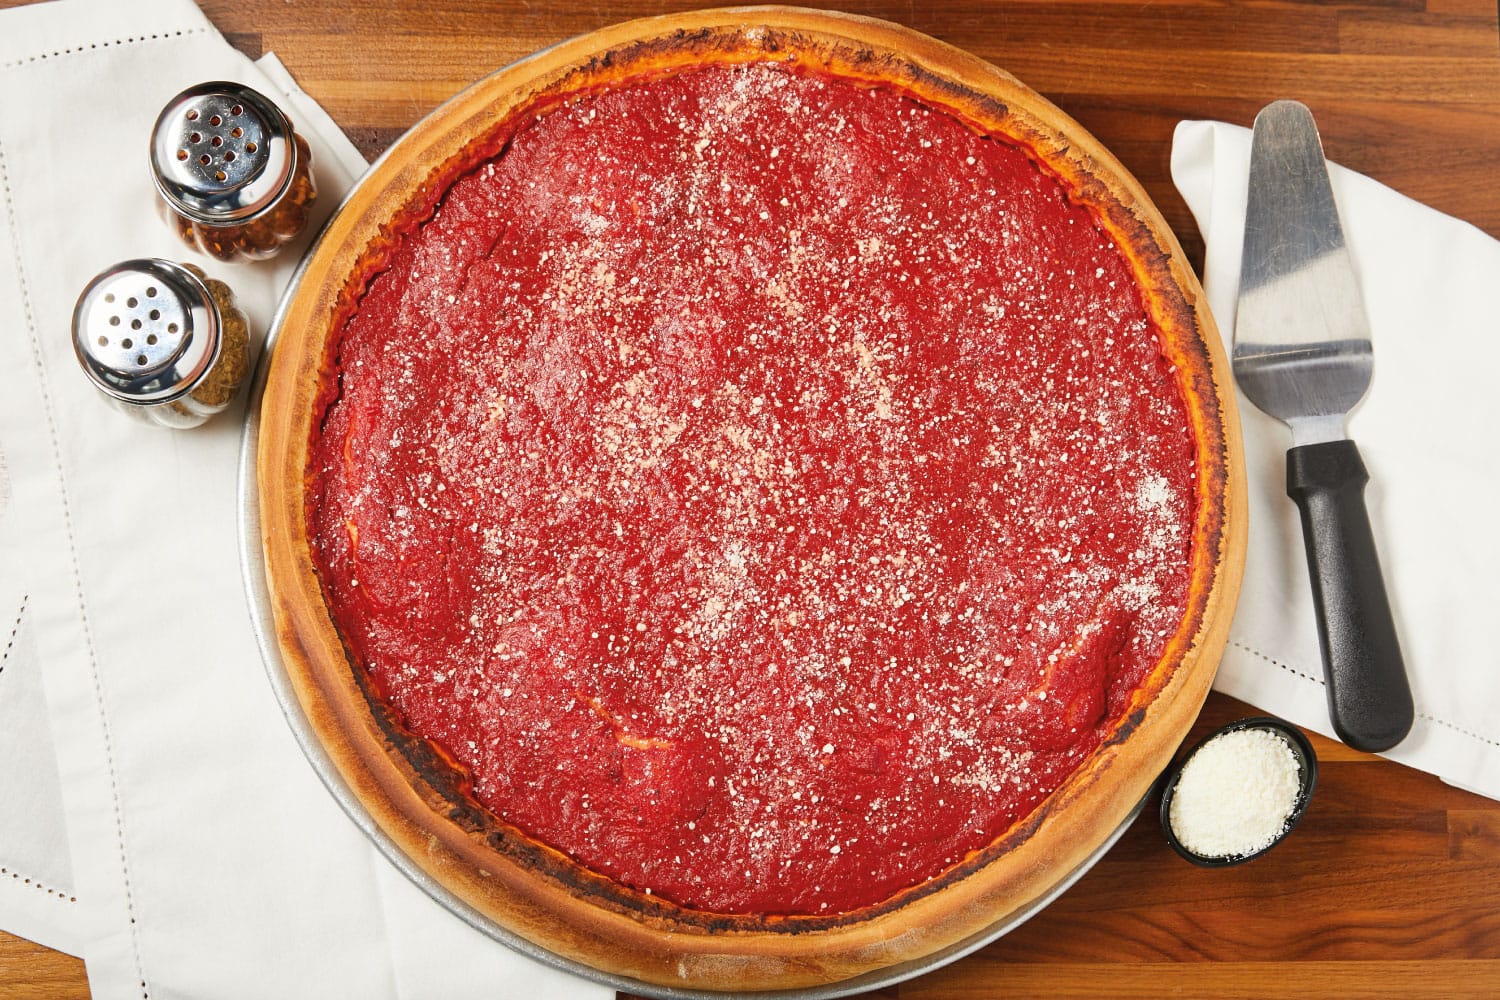 A large and delicious deep dish pizza pie ready to be sliced